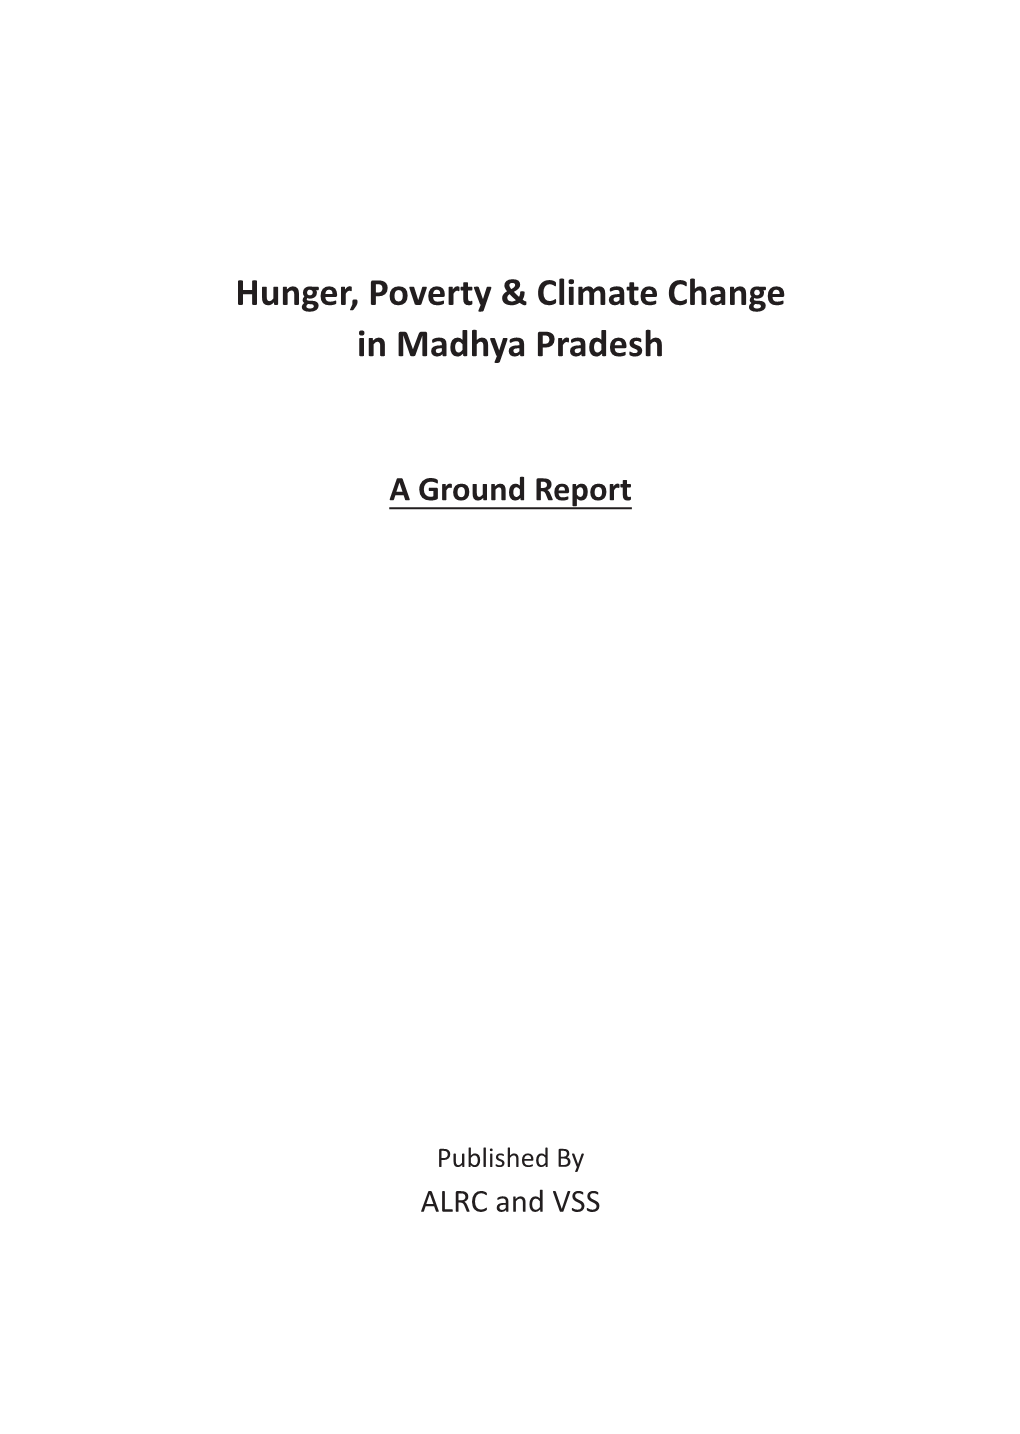 Hunger, Poverty & Climate Change in Madhya Pradesh